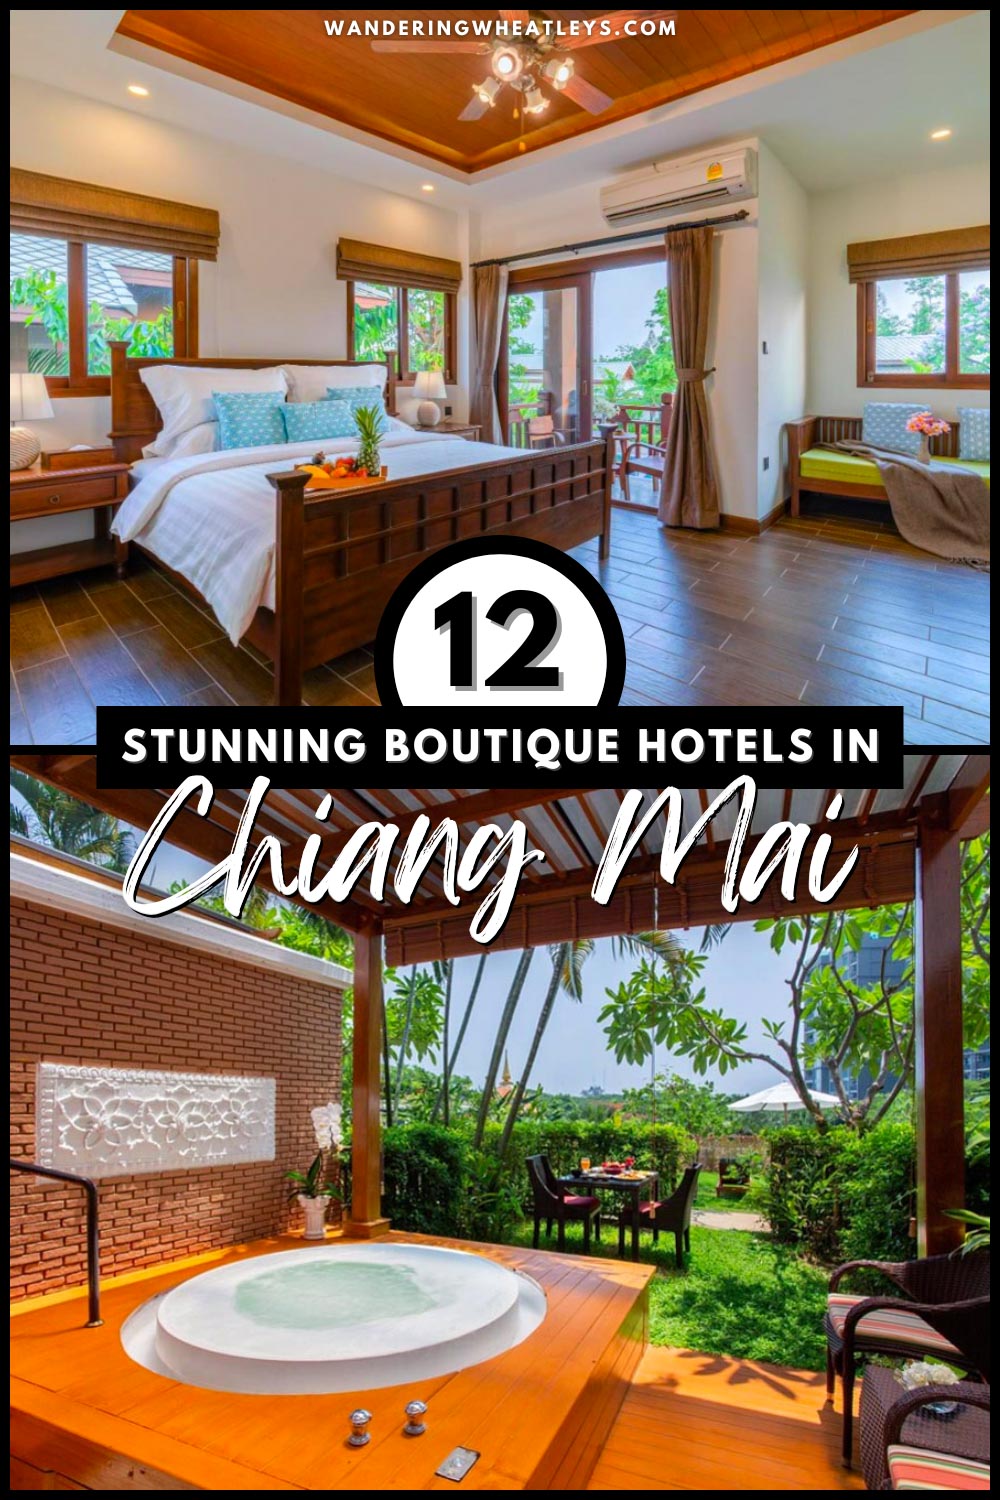 Best Boutique Hotels in Chiang Mia